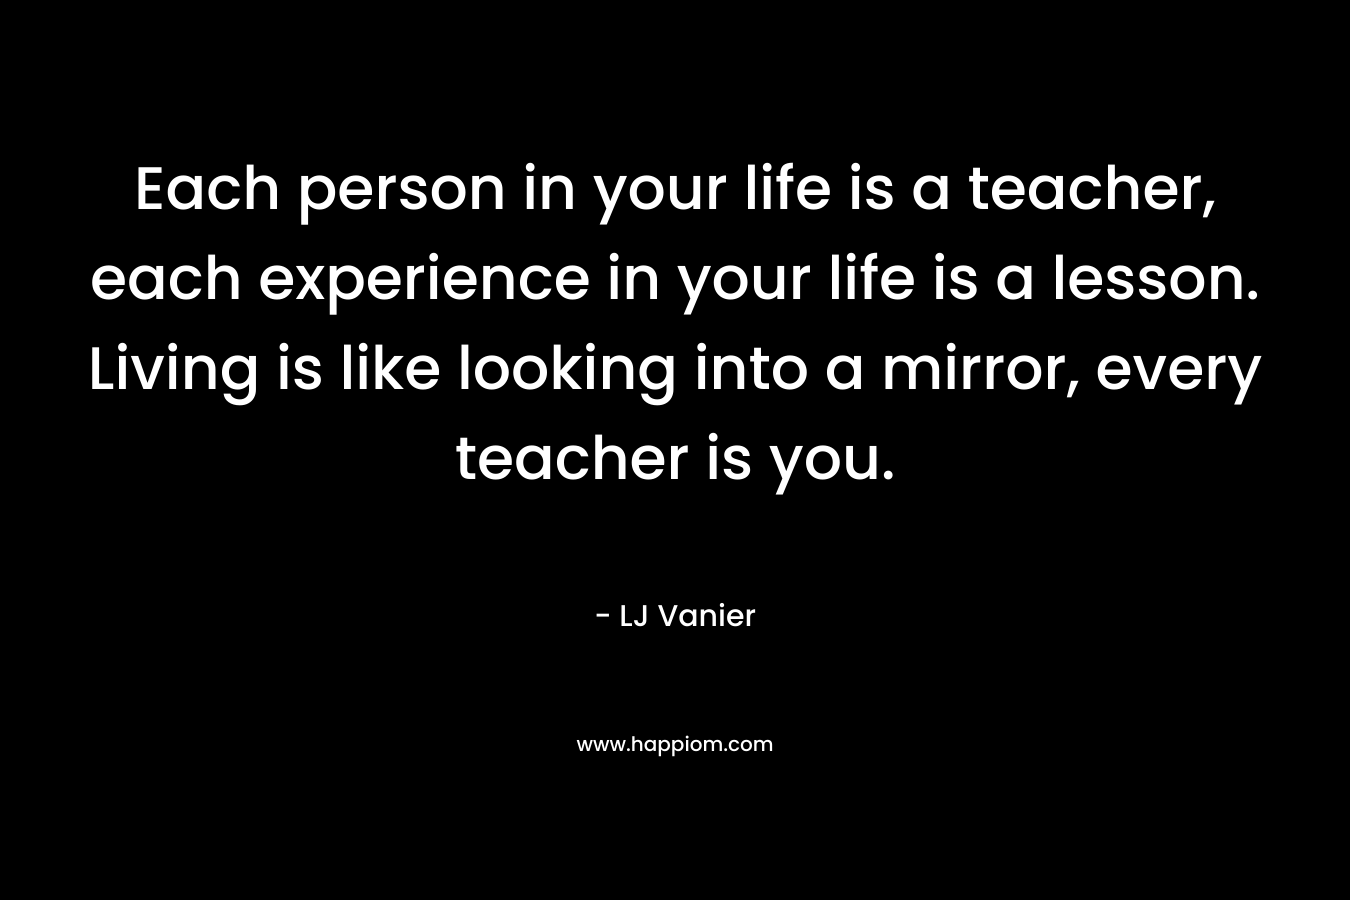 Each person in your life is a teacher, each experience in your life is a lesson. Living is like looking into a mirror, every teacher is you.